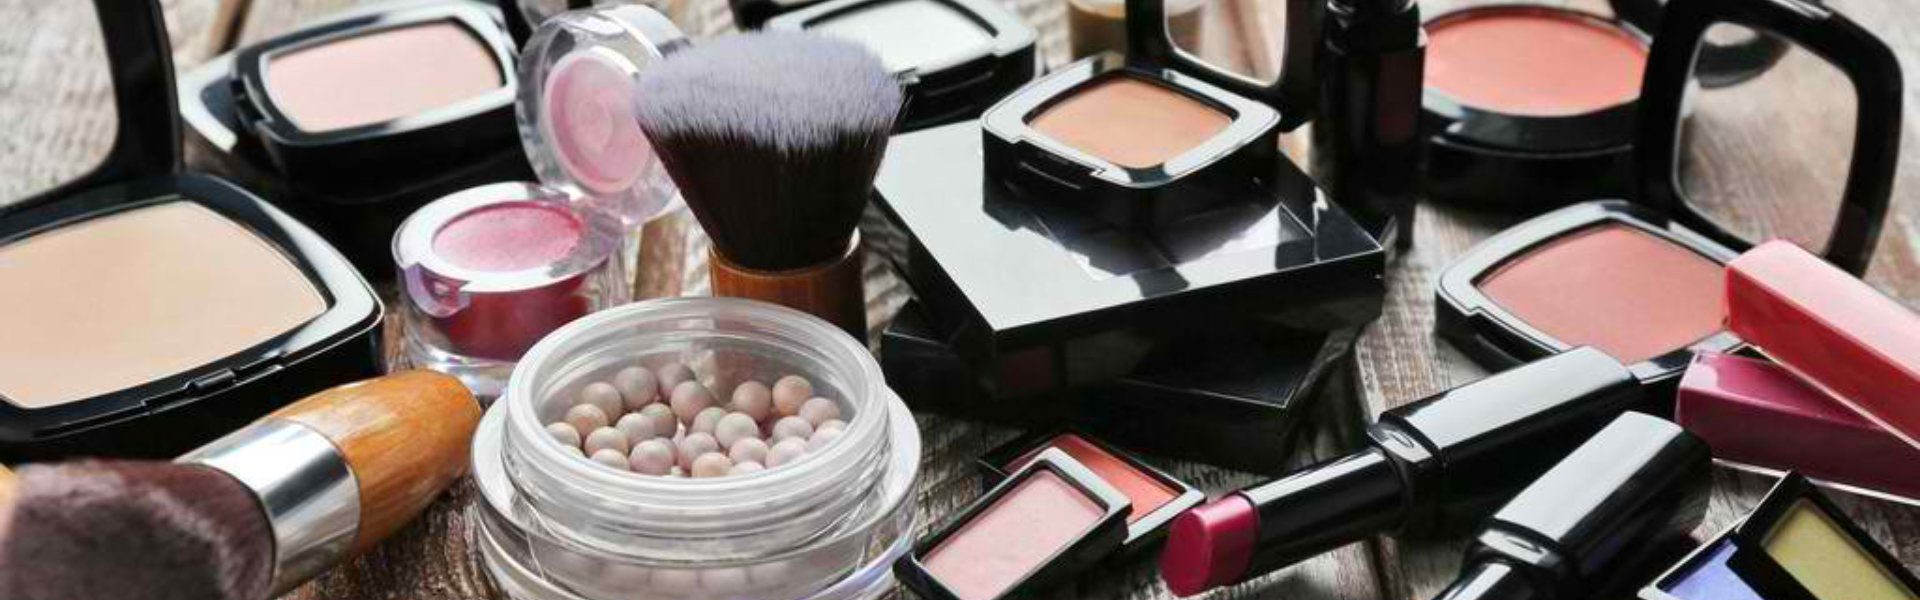 different kinds of cosmetics